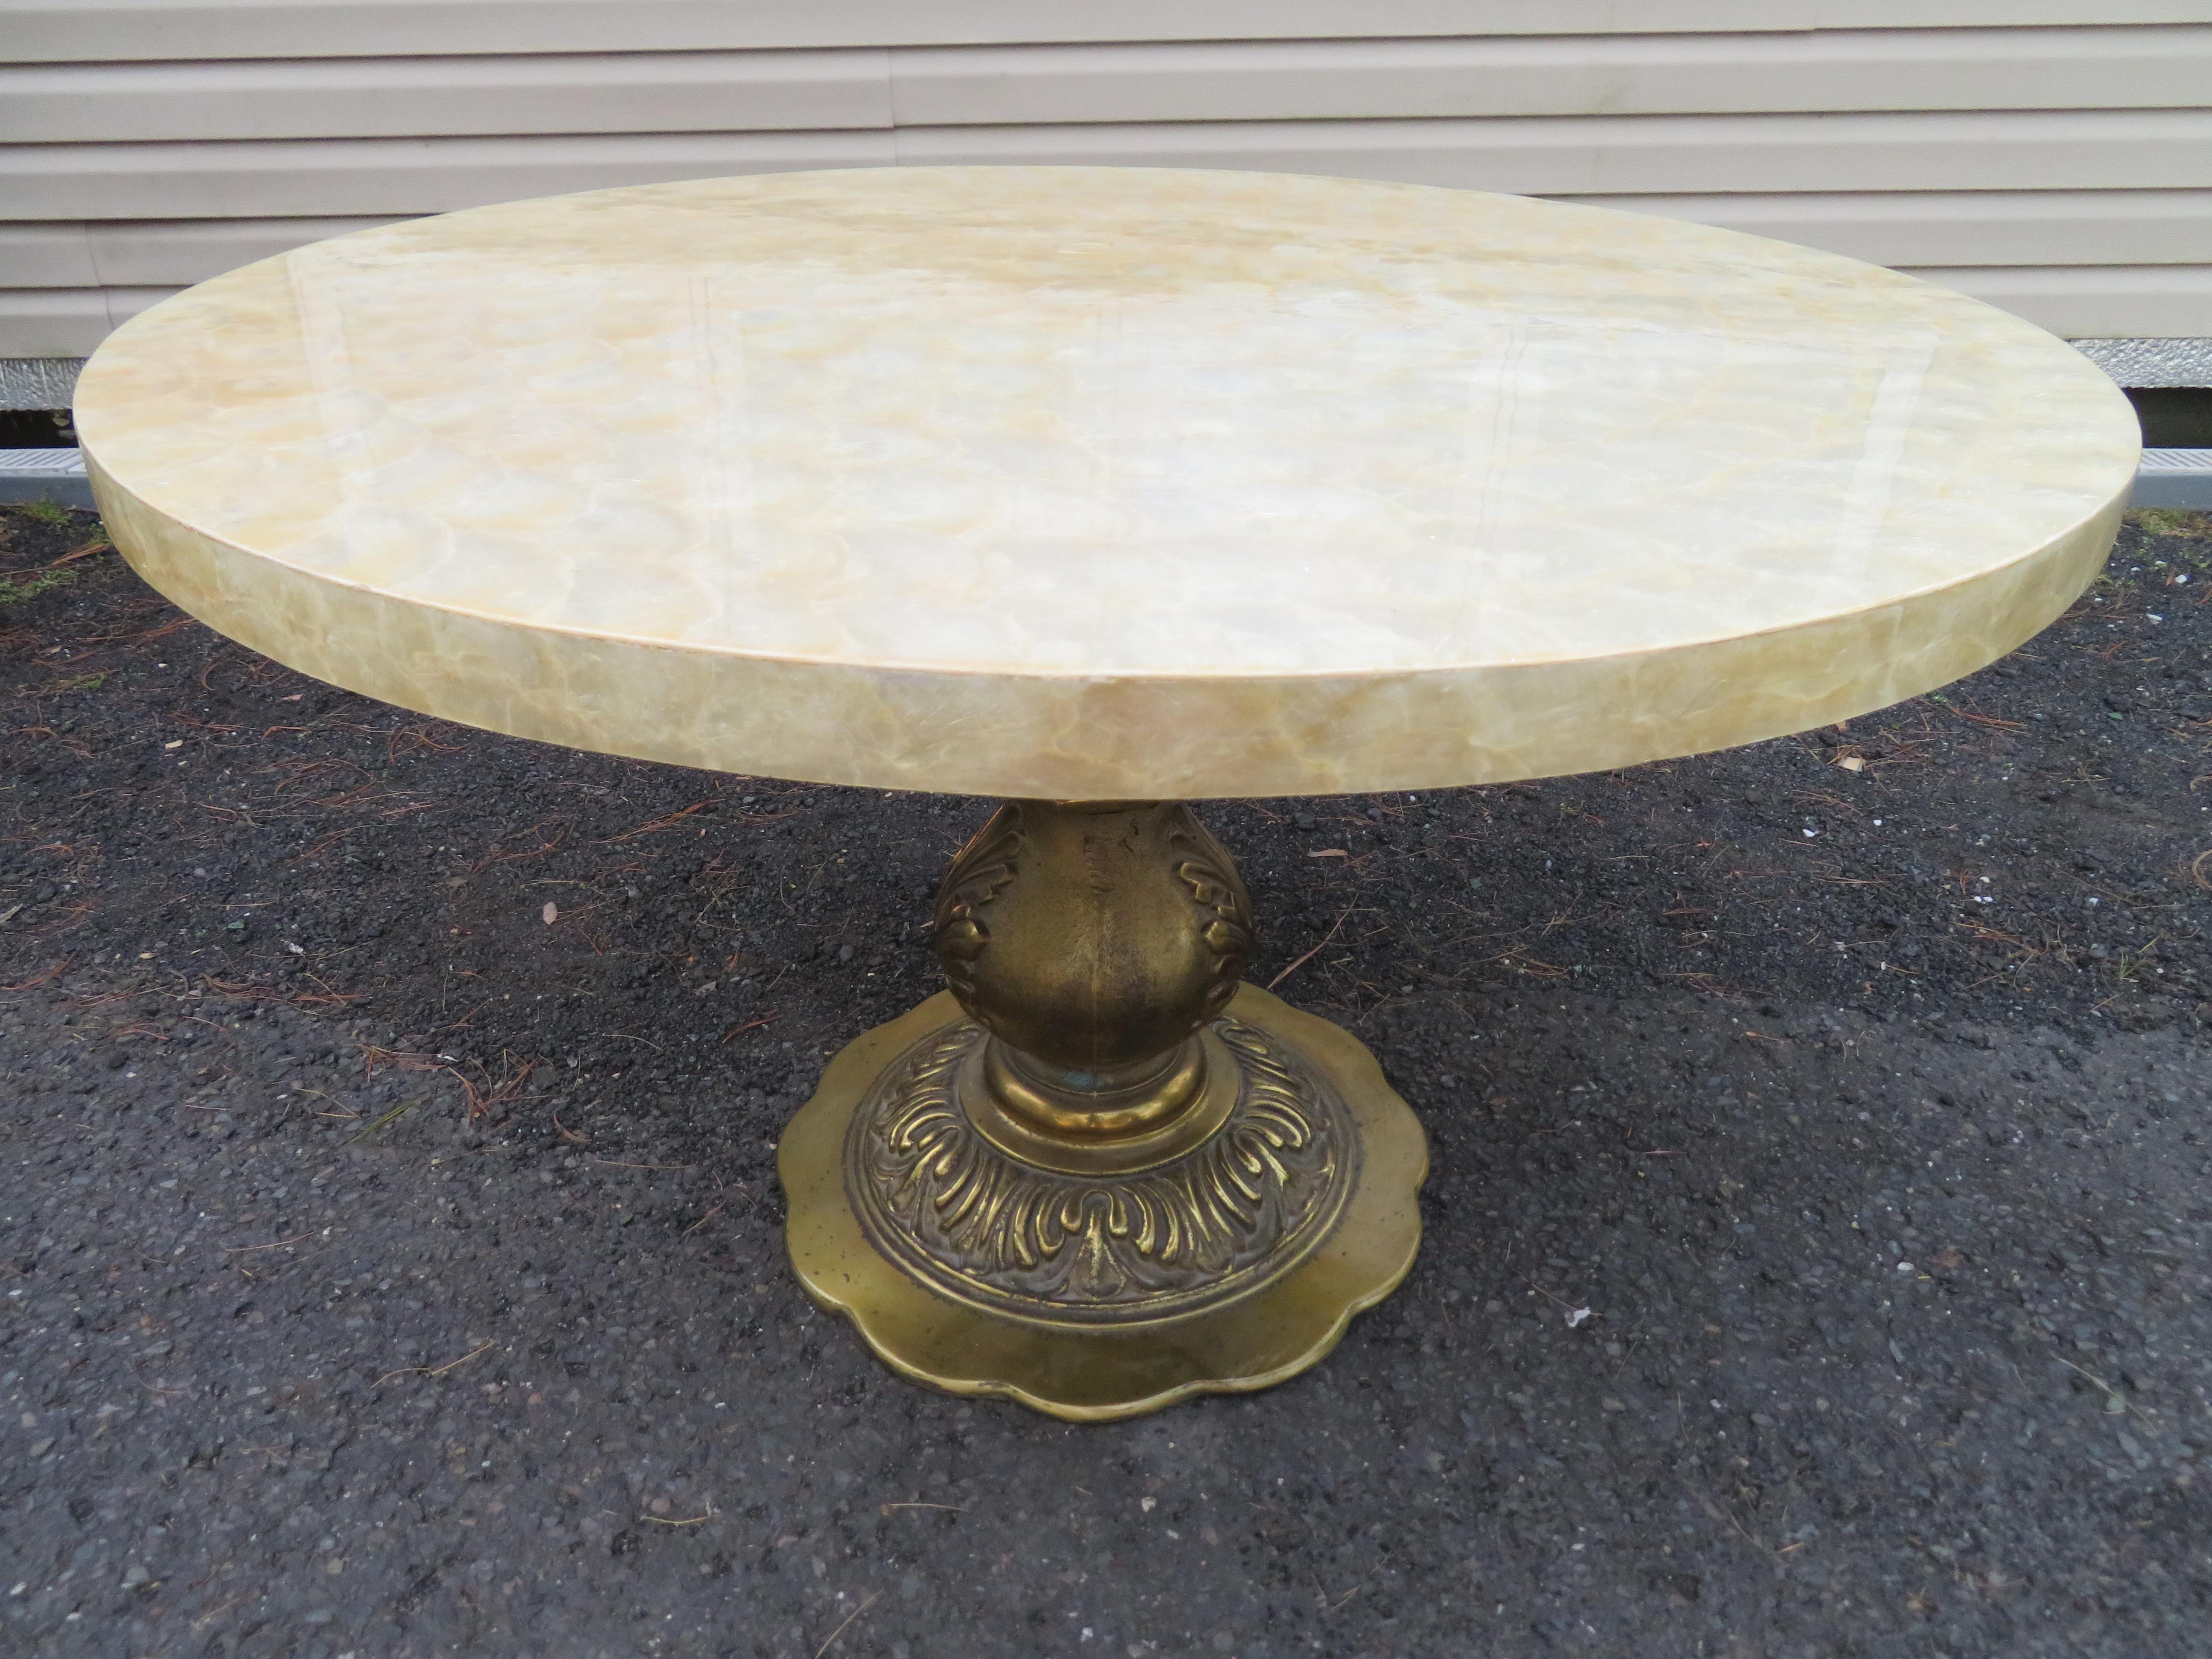 Wonderful Hollywood regency Capiz shell center table. We just love the capiz shell top with the ornate brass pedestal base. This table measures 26